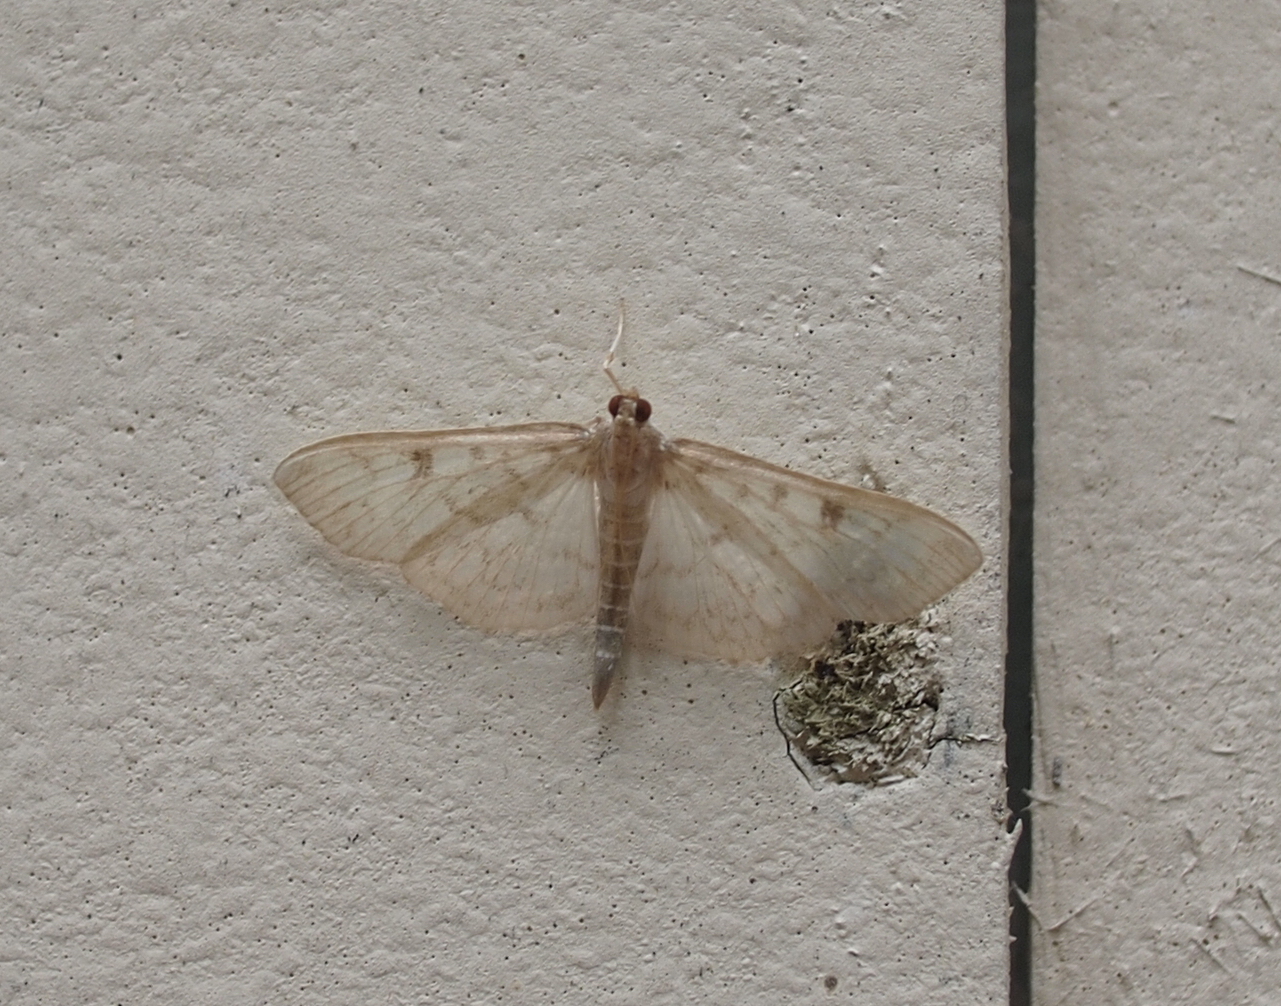 Bold-feathered Grass Moth